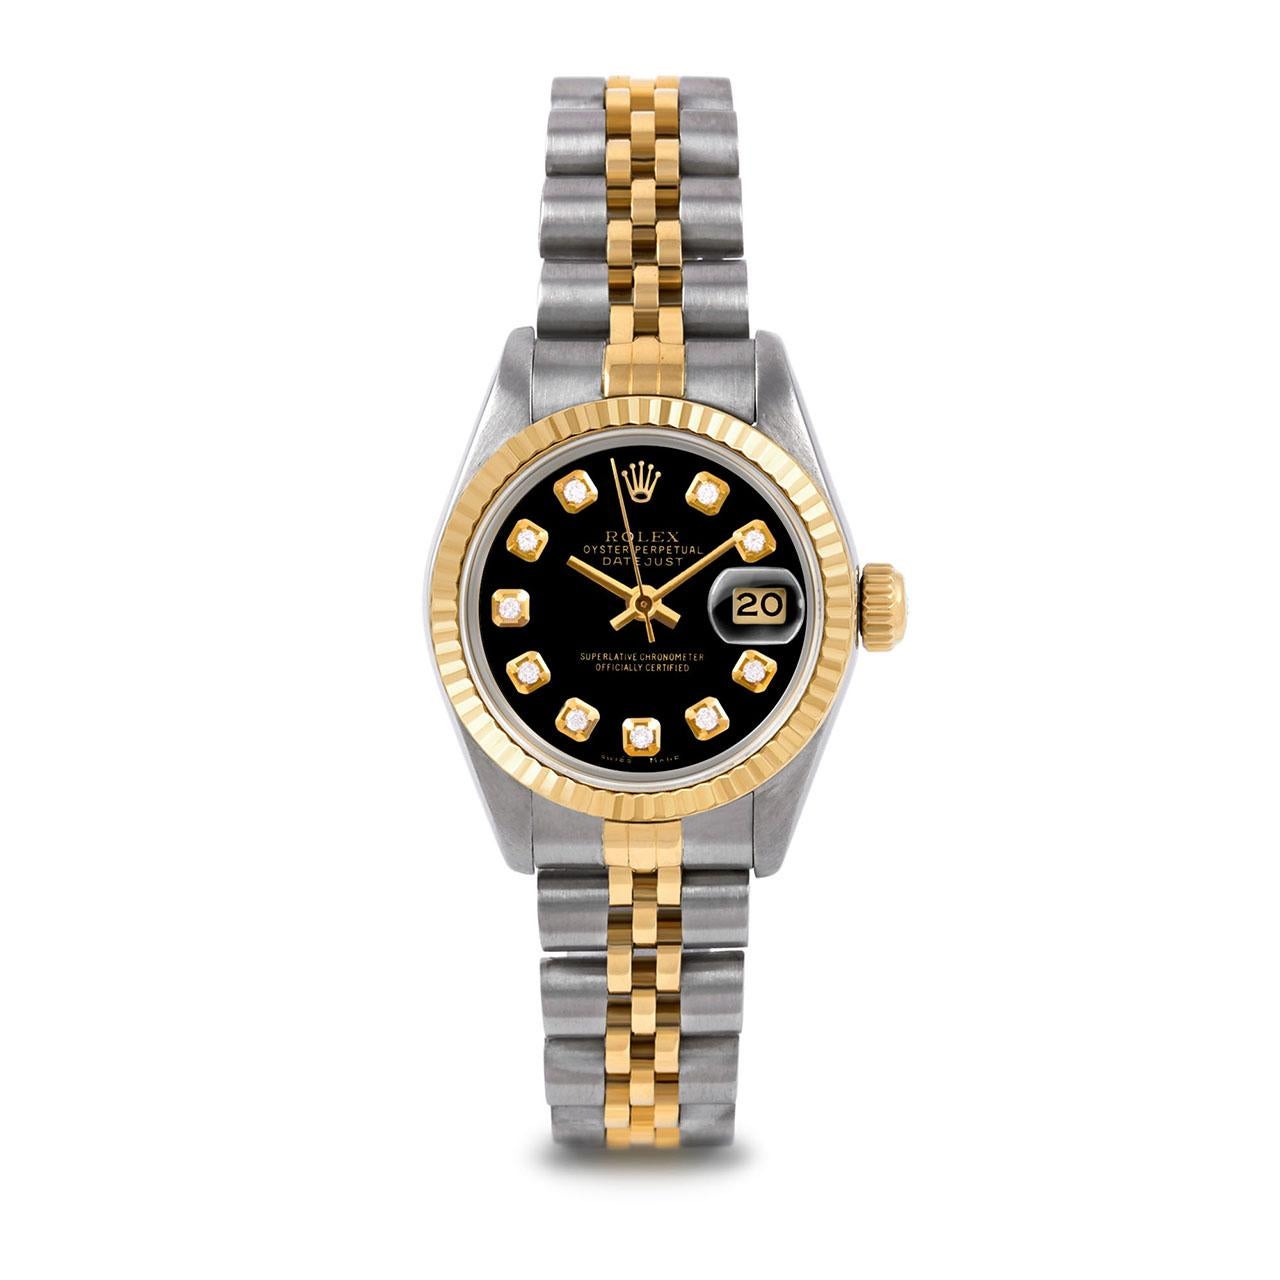 Pre-Owned Rolex 6917 Ladies 26mm Two Tone Datejust Watch, Custom Black Diamond Dial & Fluted Bezel on Rolex 14K Yellow Gold And Stainless Steel Jubilee Band.   

SKU 6917-TT-BLK-DIA-AM-FLT-JBL


Brand/Model:        Rolex Datejust
Model Number:      